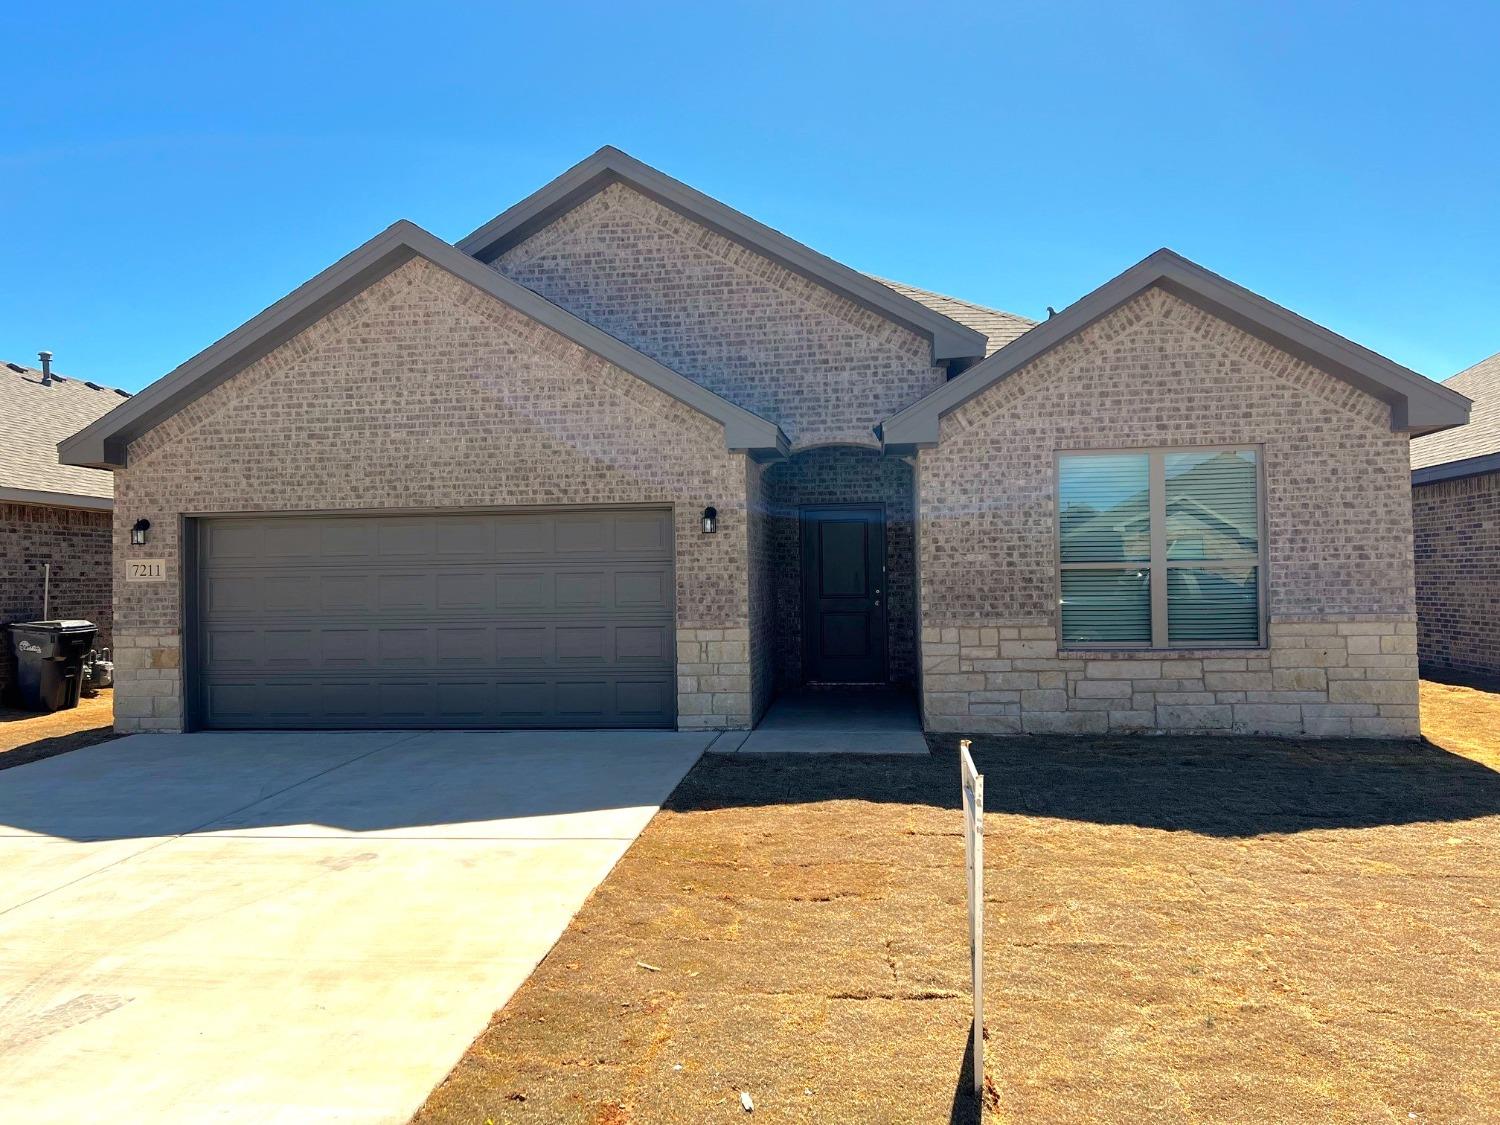 Brand new home by HomeMakers now completed!    **$5,000 Builder incentive! Come and see this 2,290 sq. ft. 4 bed, 3 bath, 2 car garage in Bushland Springs.  Frenship ISD.  Sod and Sprinkler included! Pinehurst Floorplan.